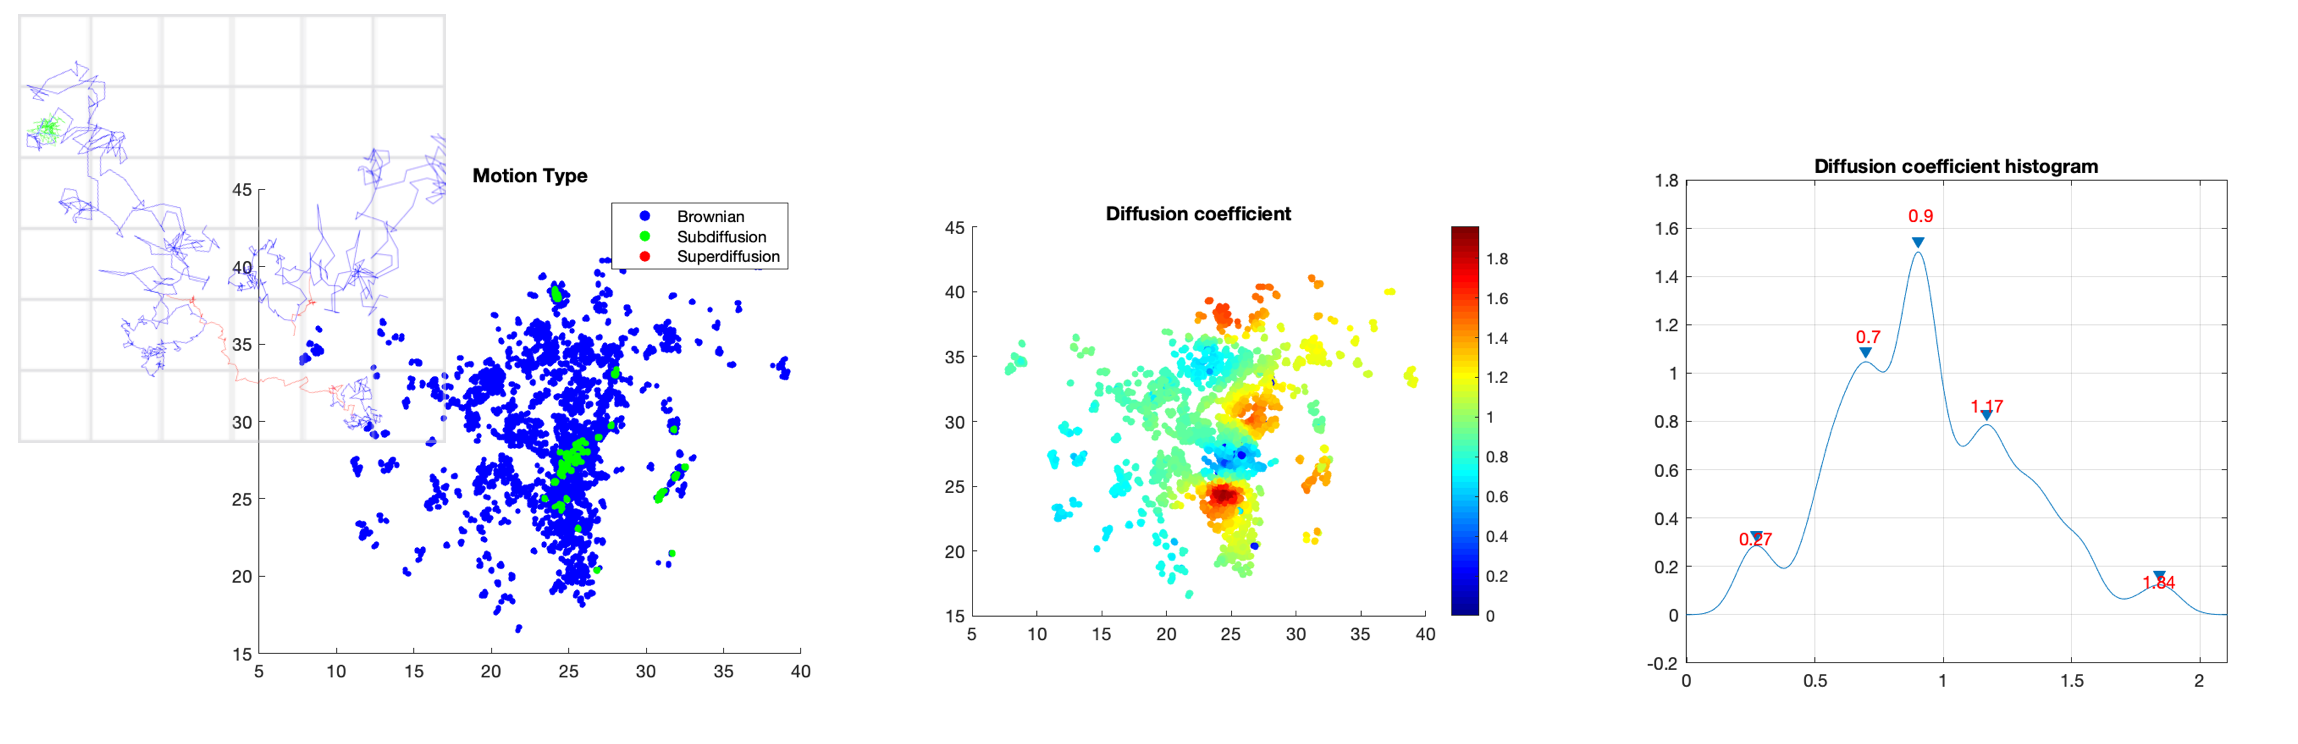 Analysis of dynamics of trancription factors in the nucleus. Left: classification of trajectories into three diffusion modes: sub-diffusion (green), super-diffusion (red), and Brownian motion (blue); middle: 2D map of the estimated diffusion coefficient; right: histogram of the 2D map.